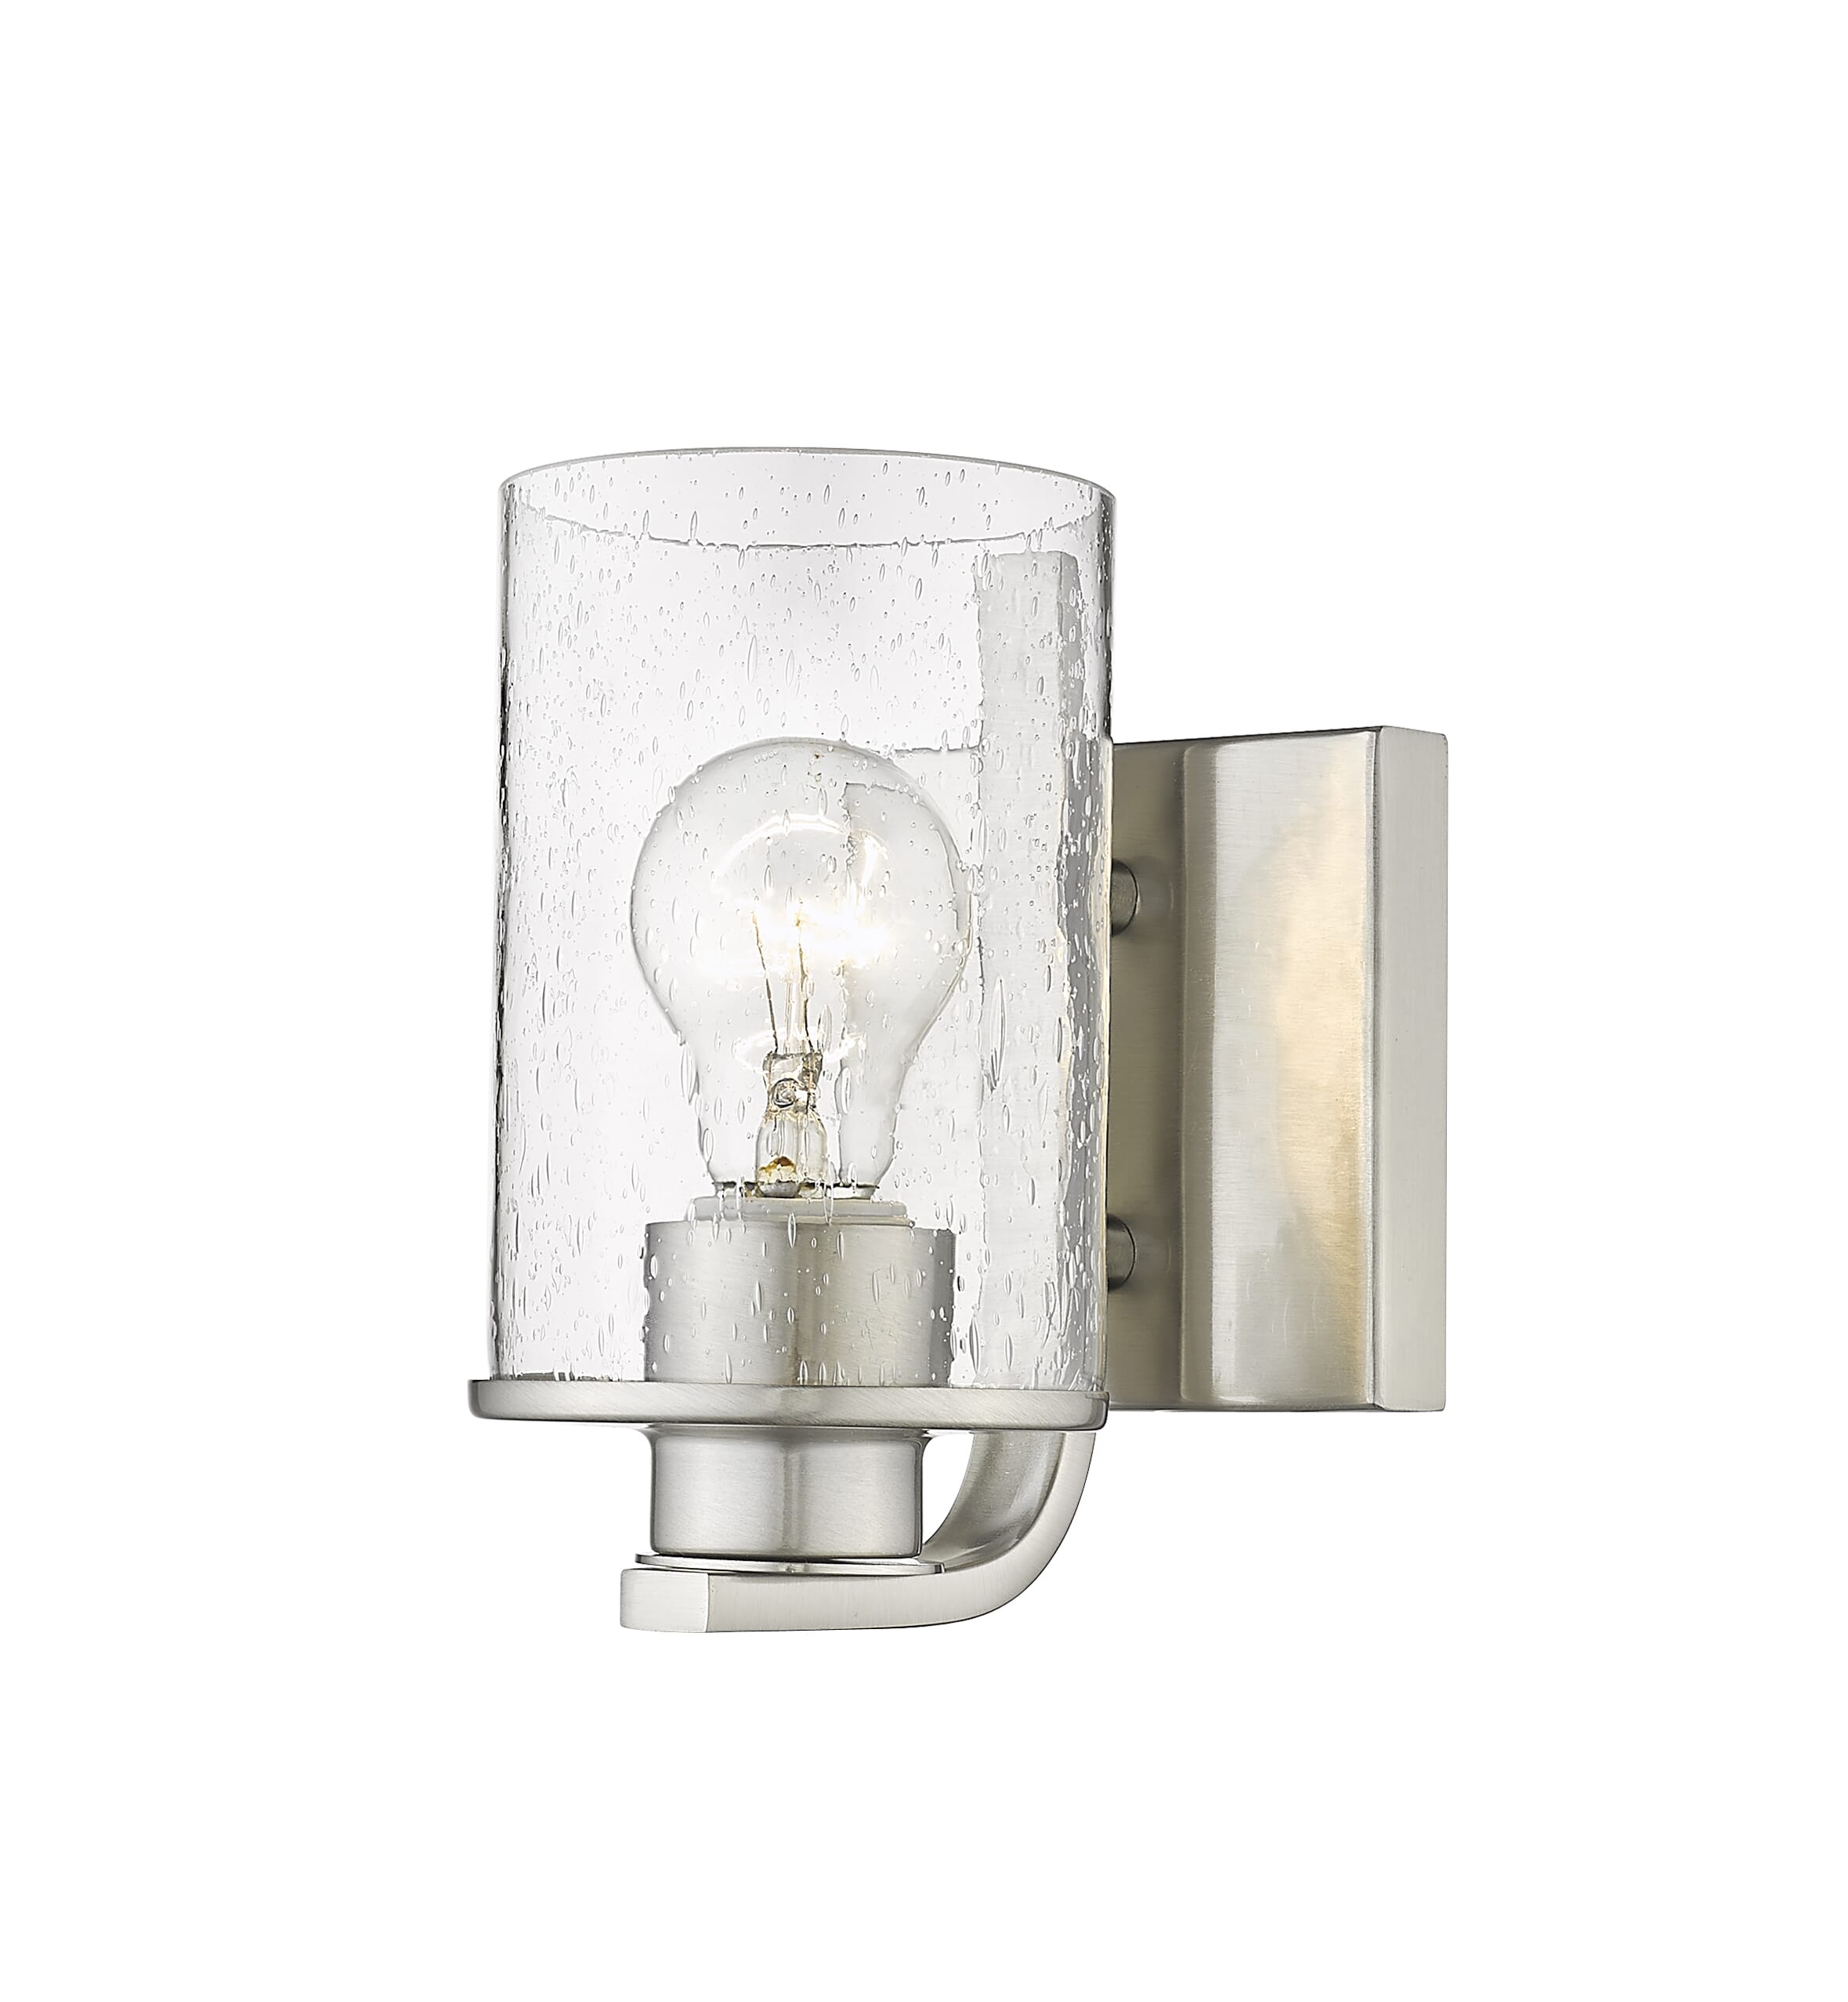 Beckett 1-Light Wall Sconce In Brushed Nickel